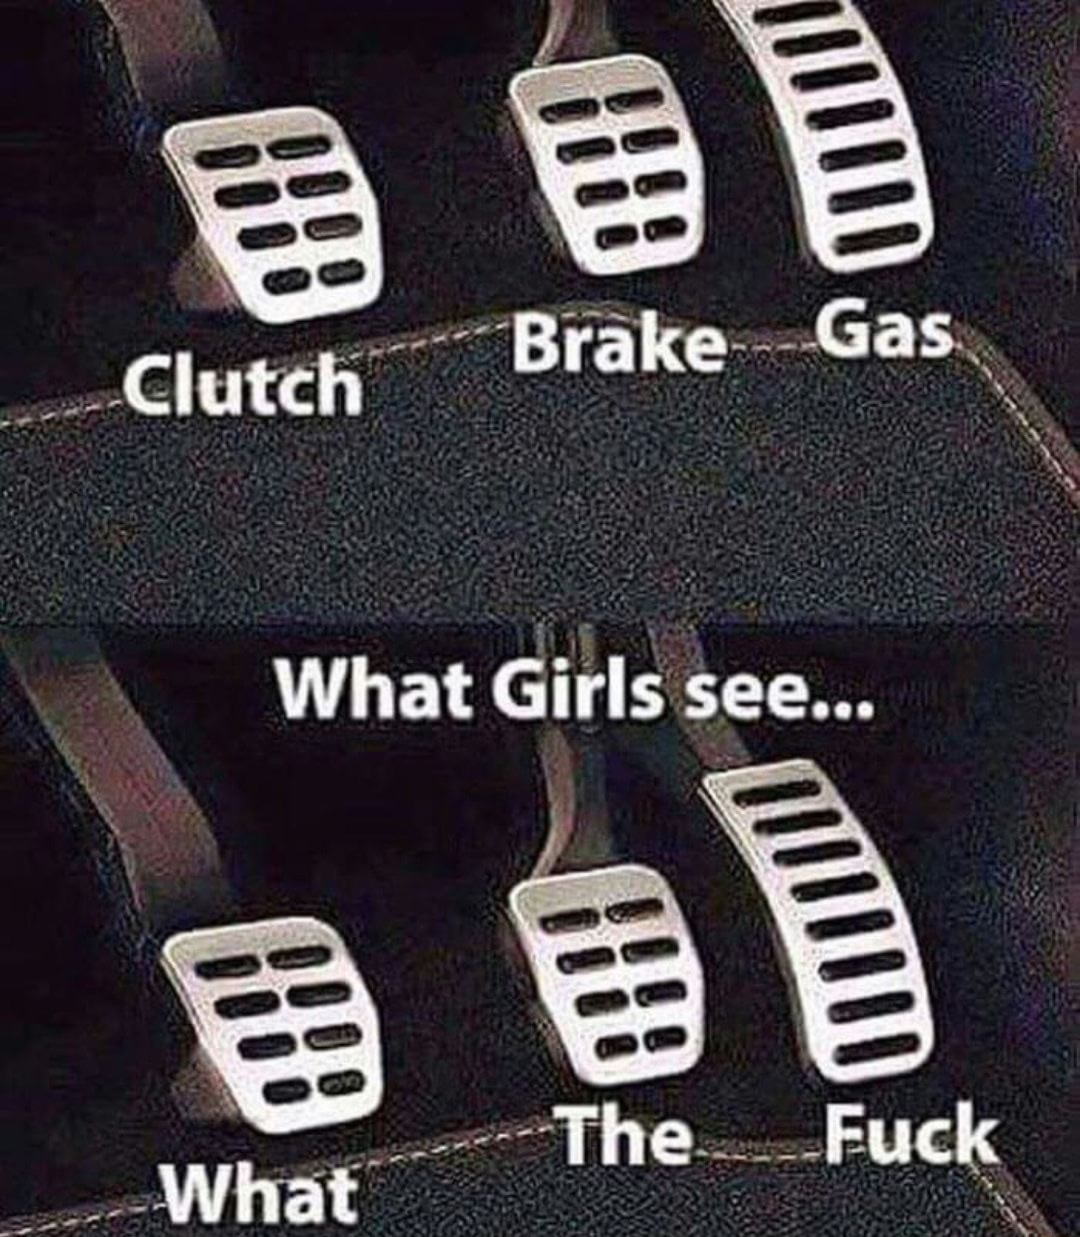 Meme about how girls see the pedals in a manual transmission car.